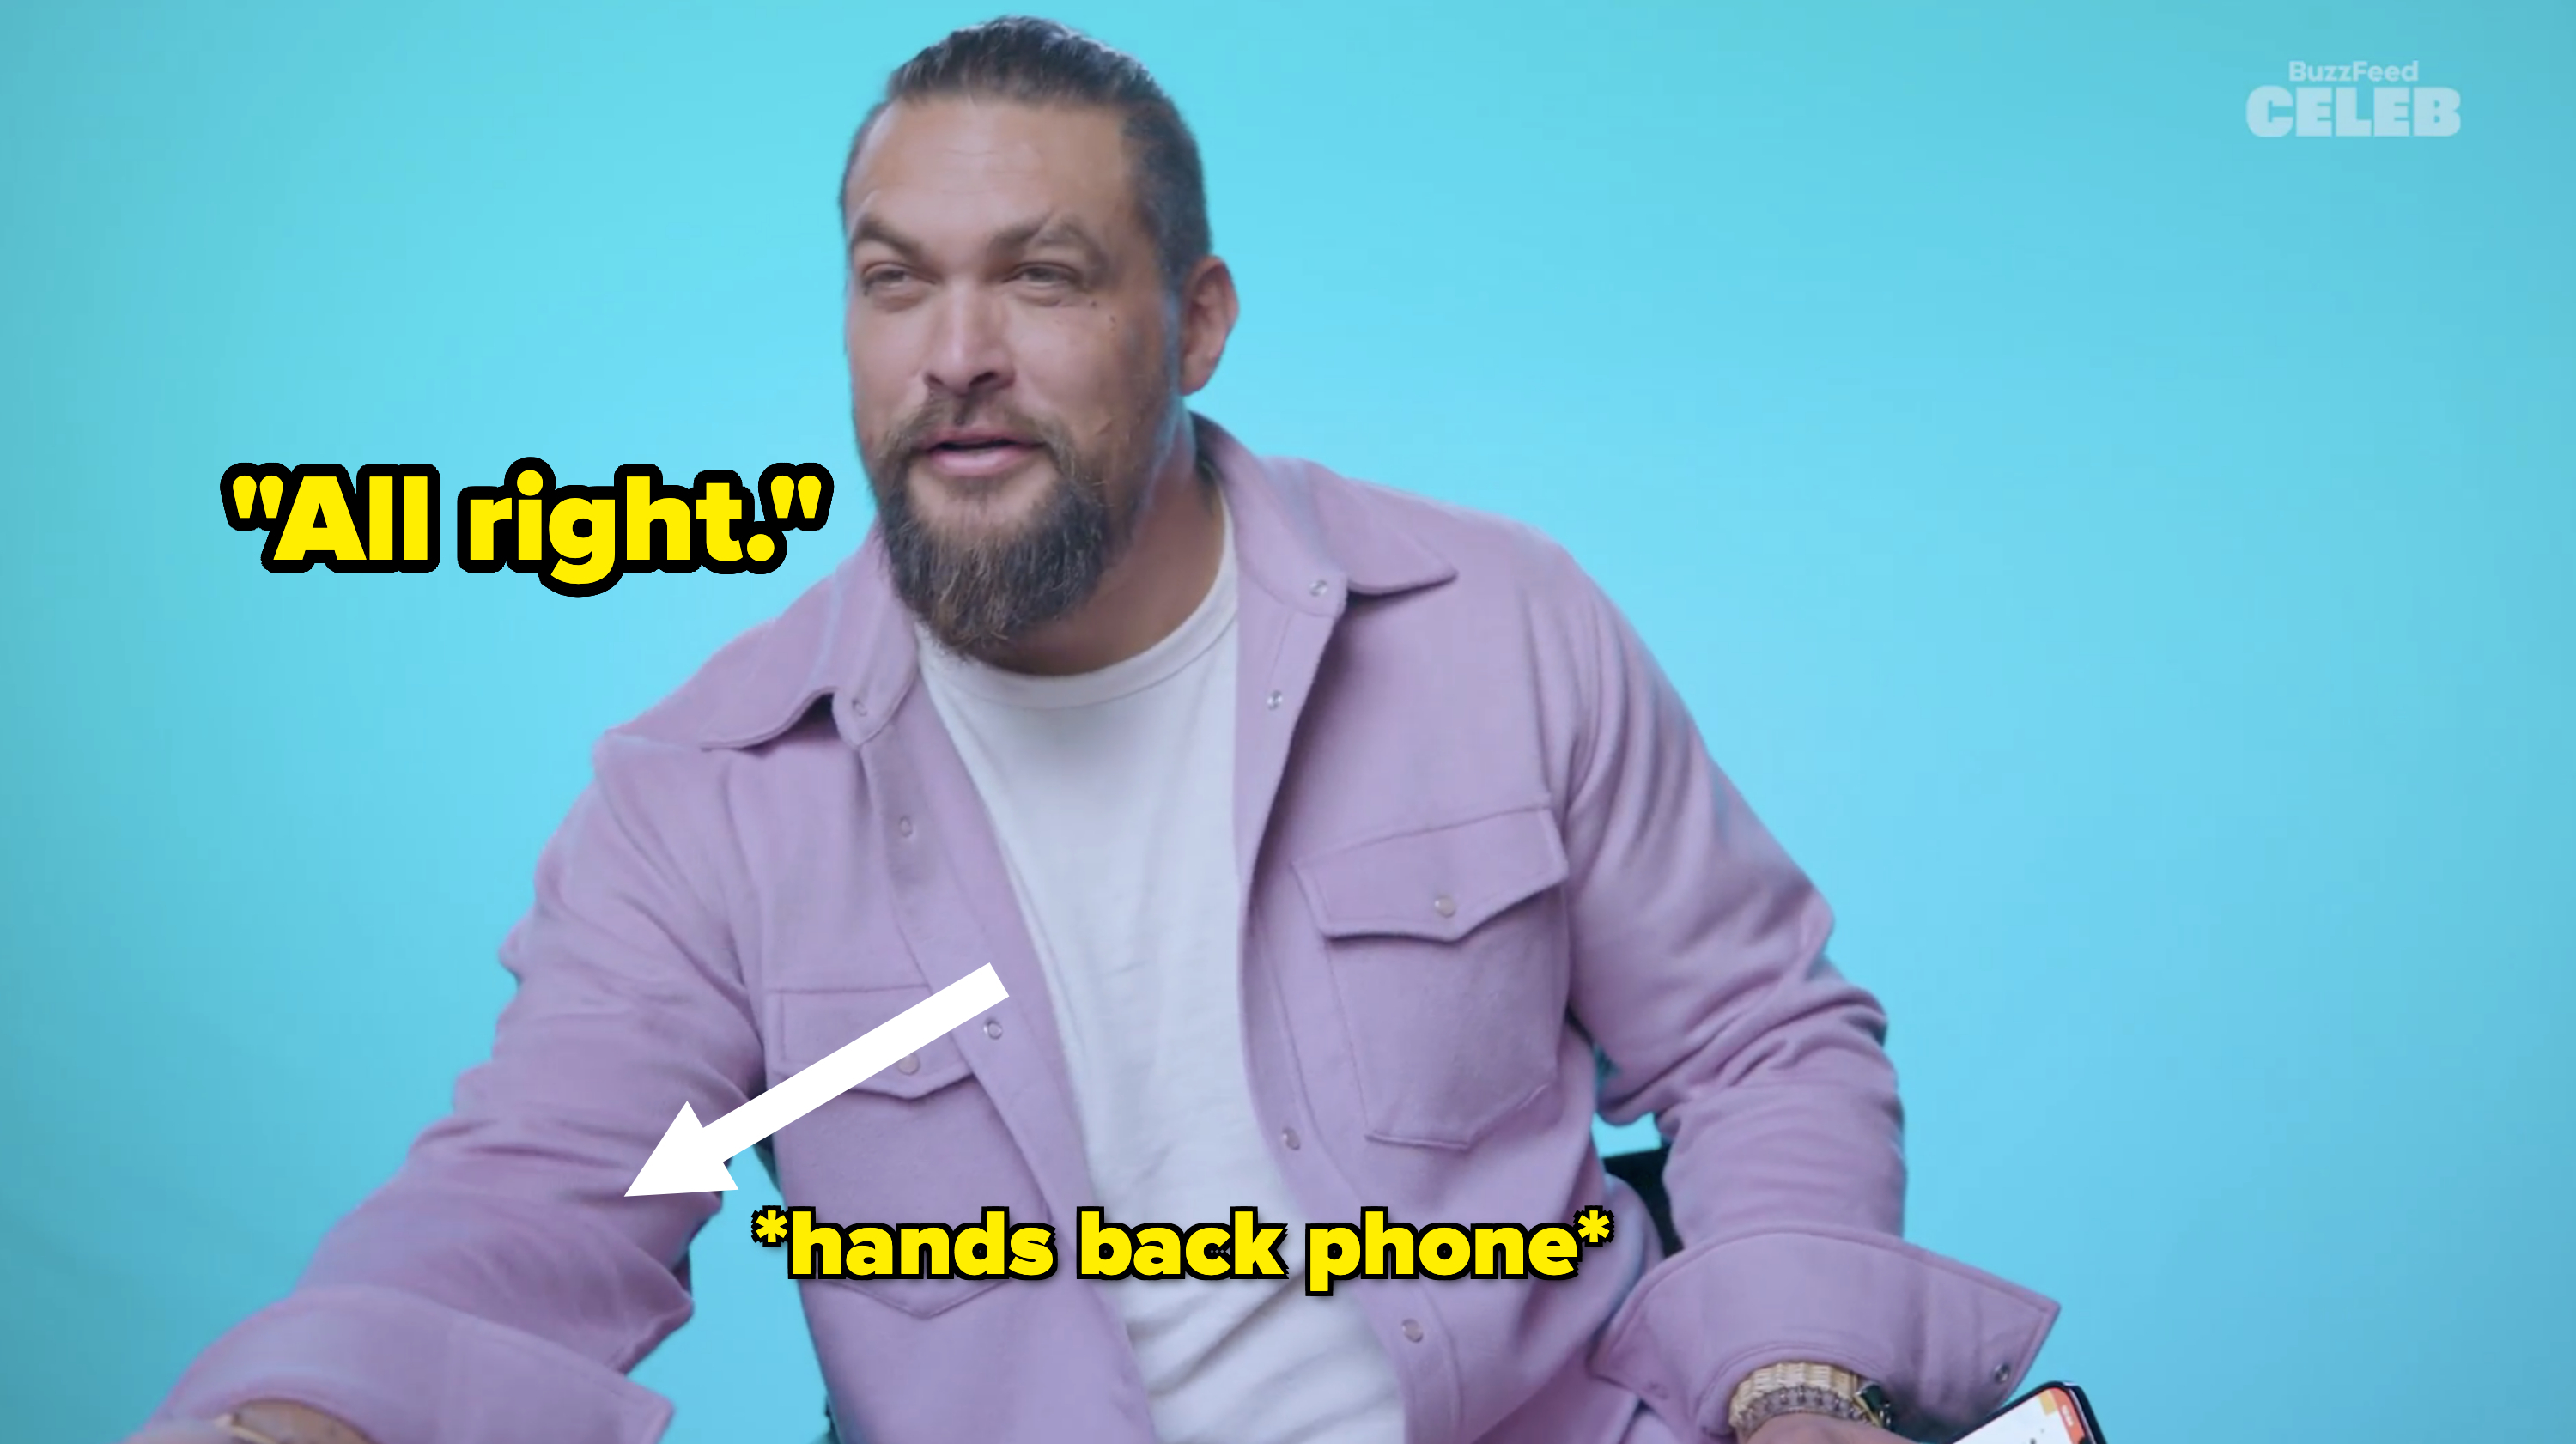 Jason said &quot;All right&quot; as he handed back the phone